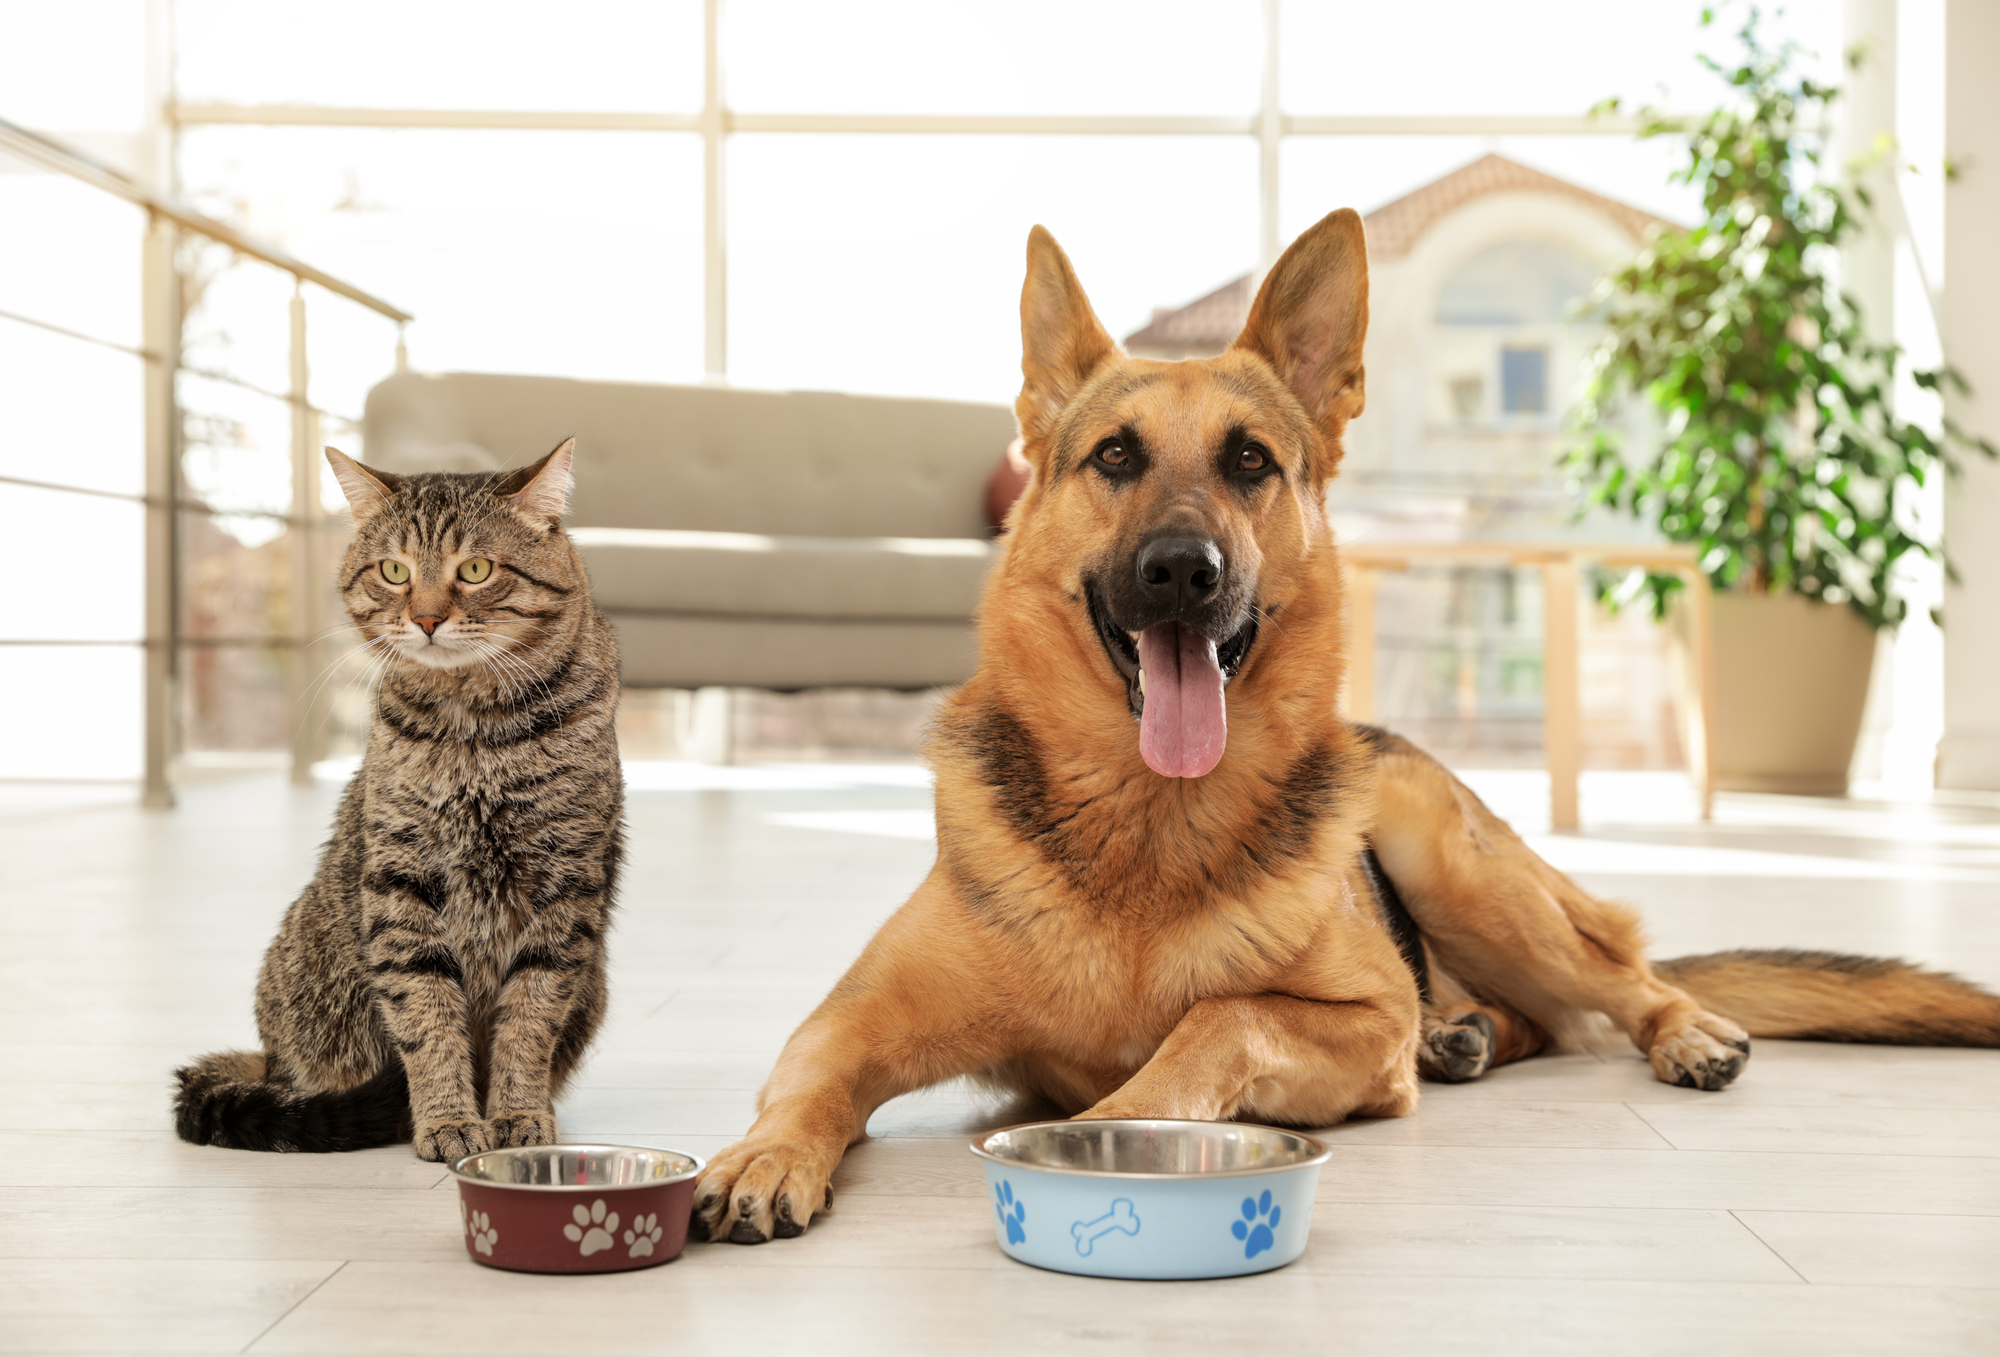 Cat and dog together with feeding bowls on floor indoors. Funny friends